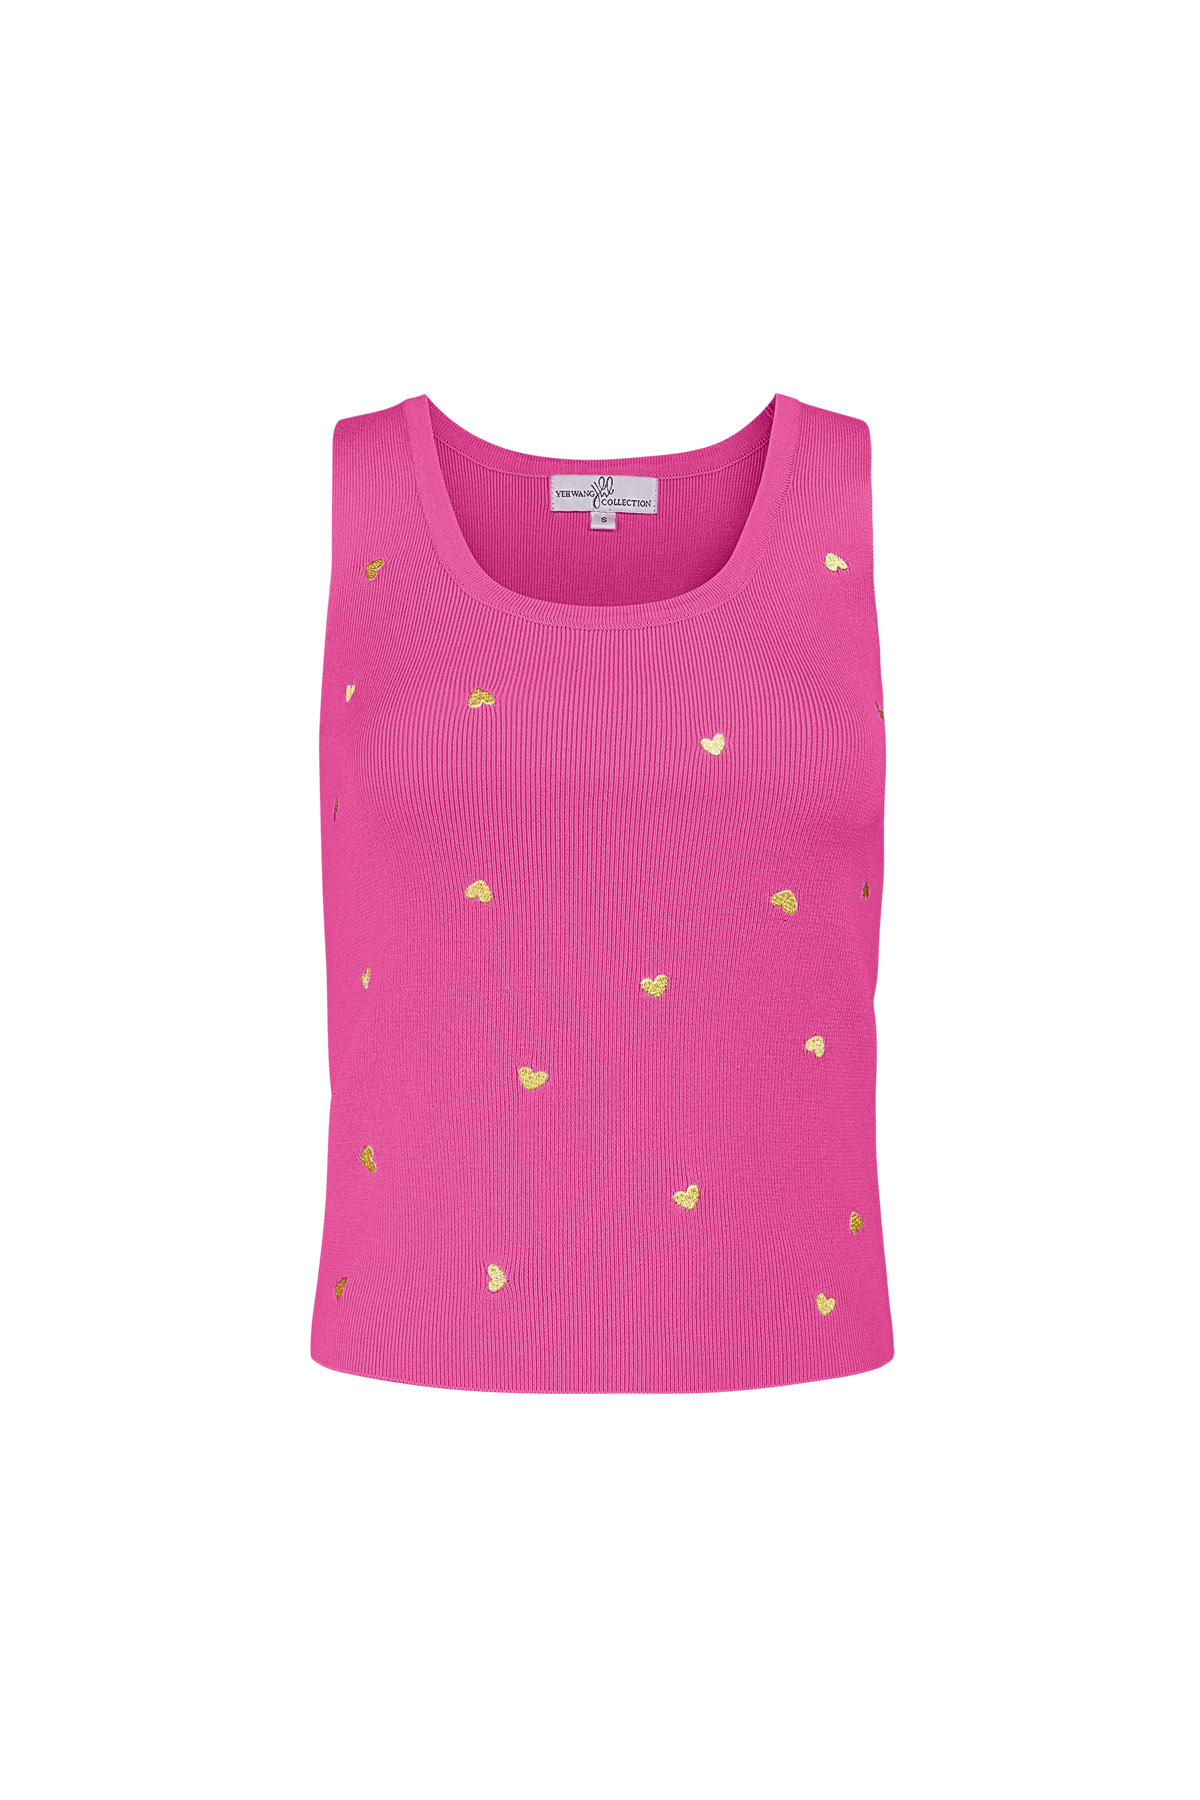 Sleeveless top with gold heart details small – pink h5 